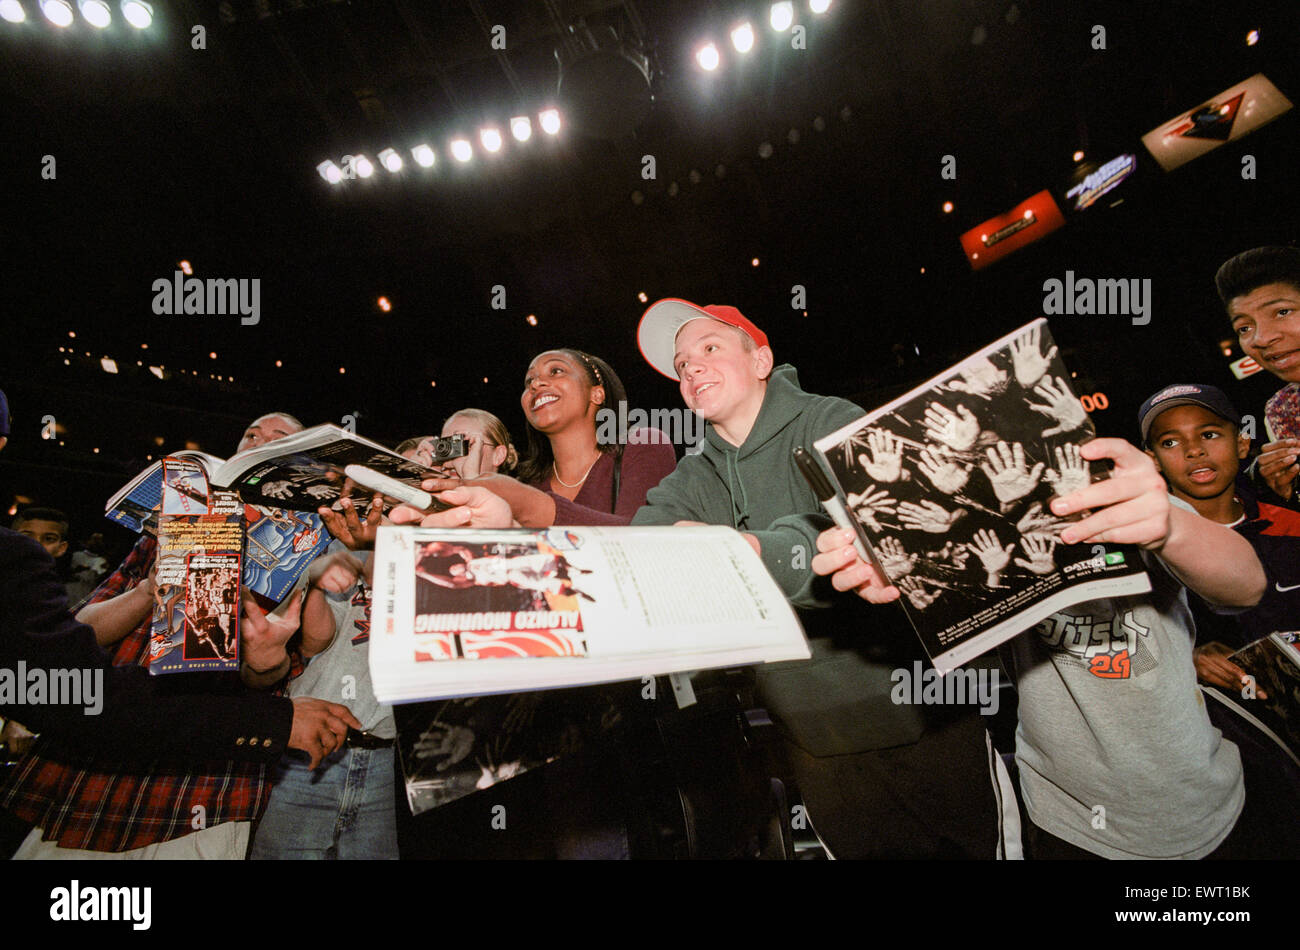 OAKLAND, CA – FEBRUARY 13: The NBA All-Star Game held in Oakland, California on February 13, 2000. Stock Photo